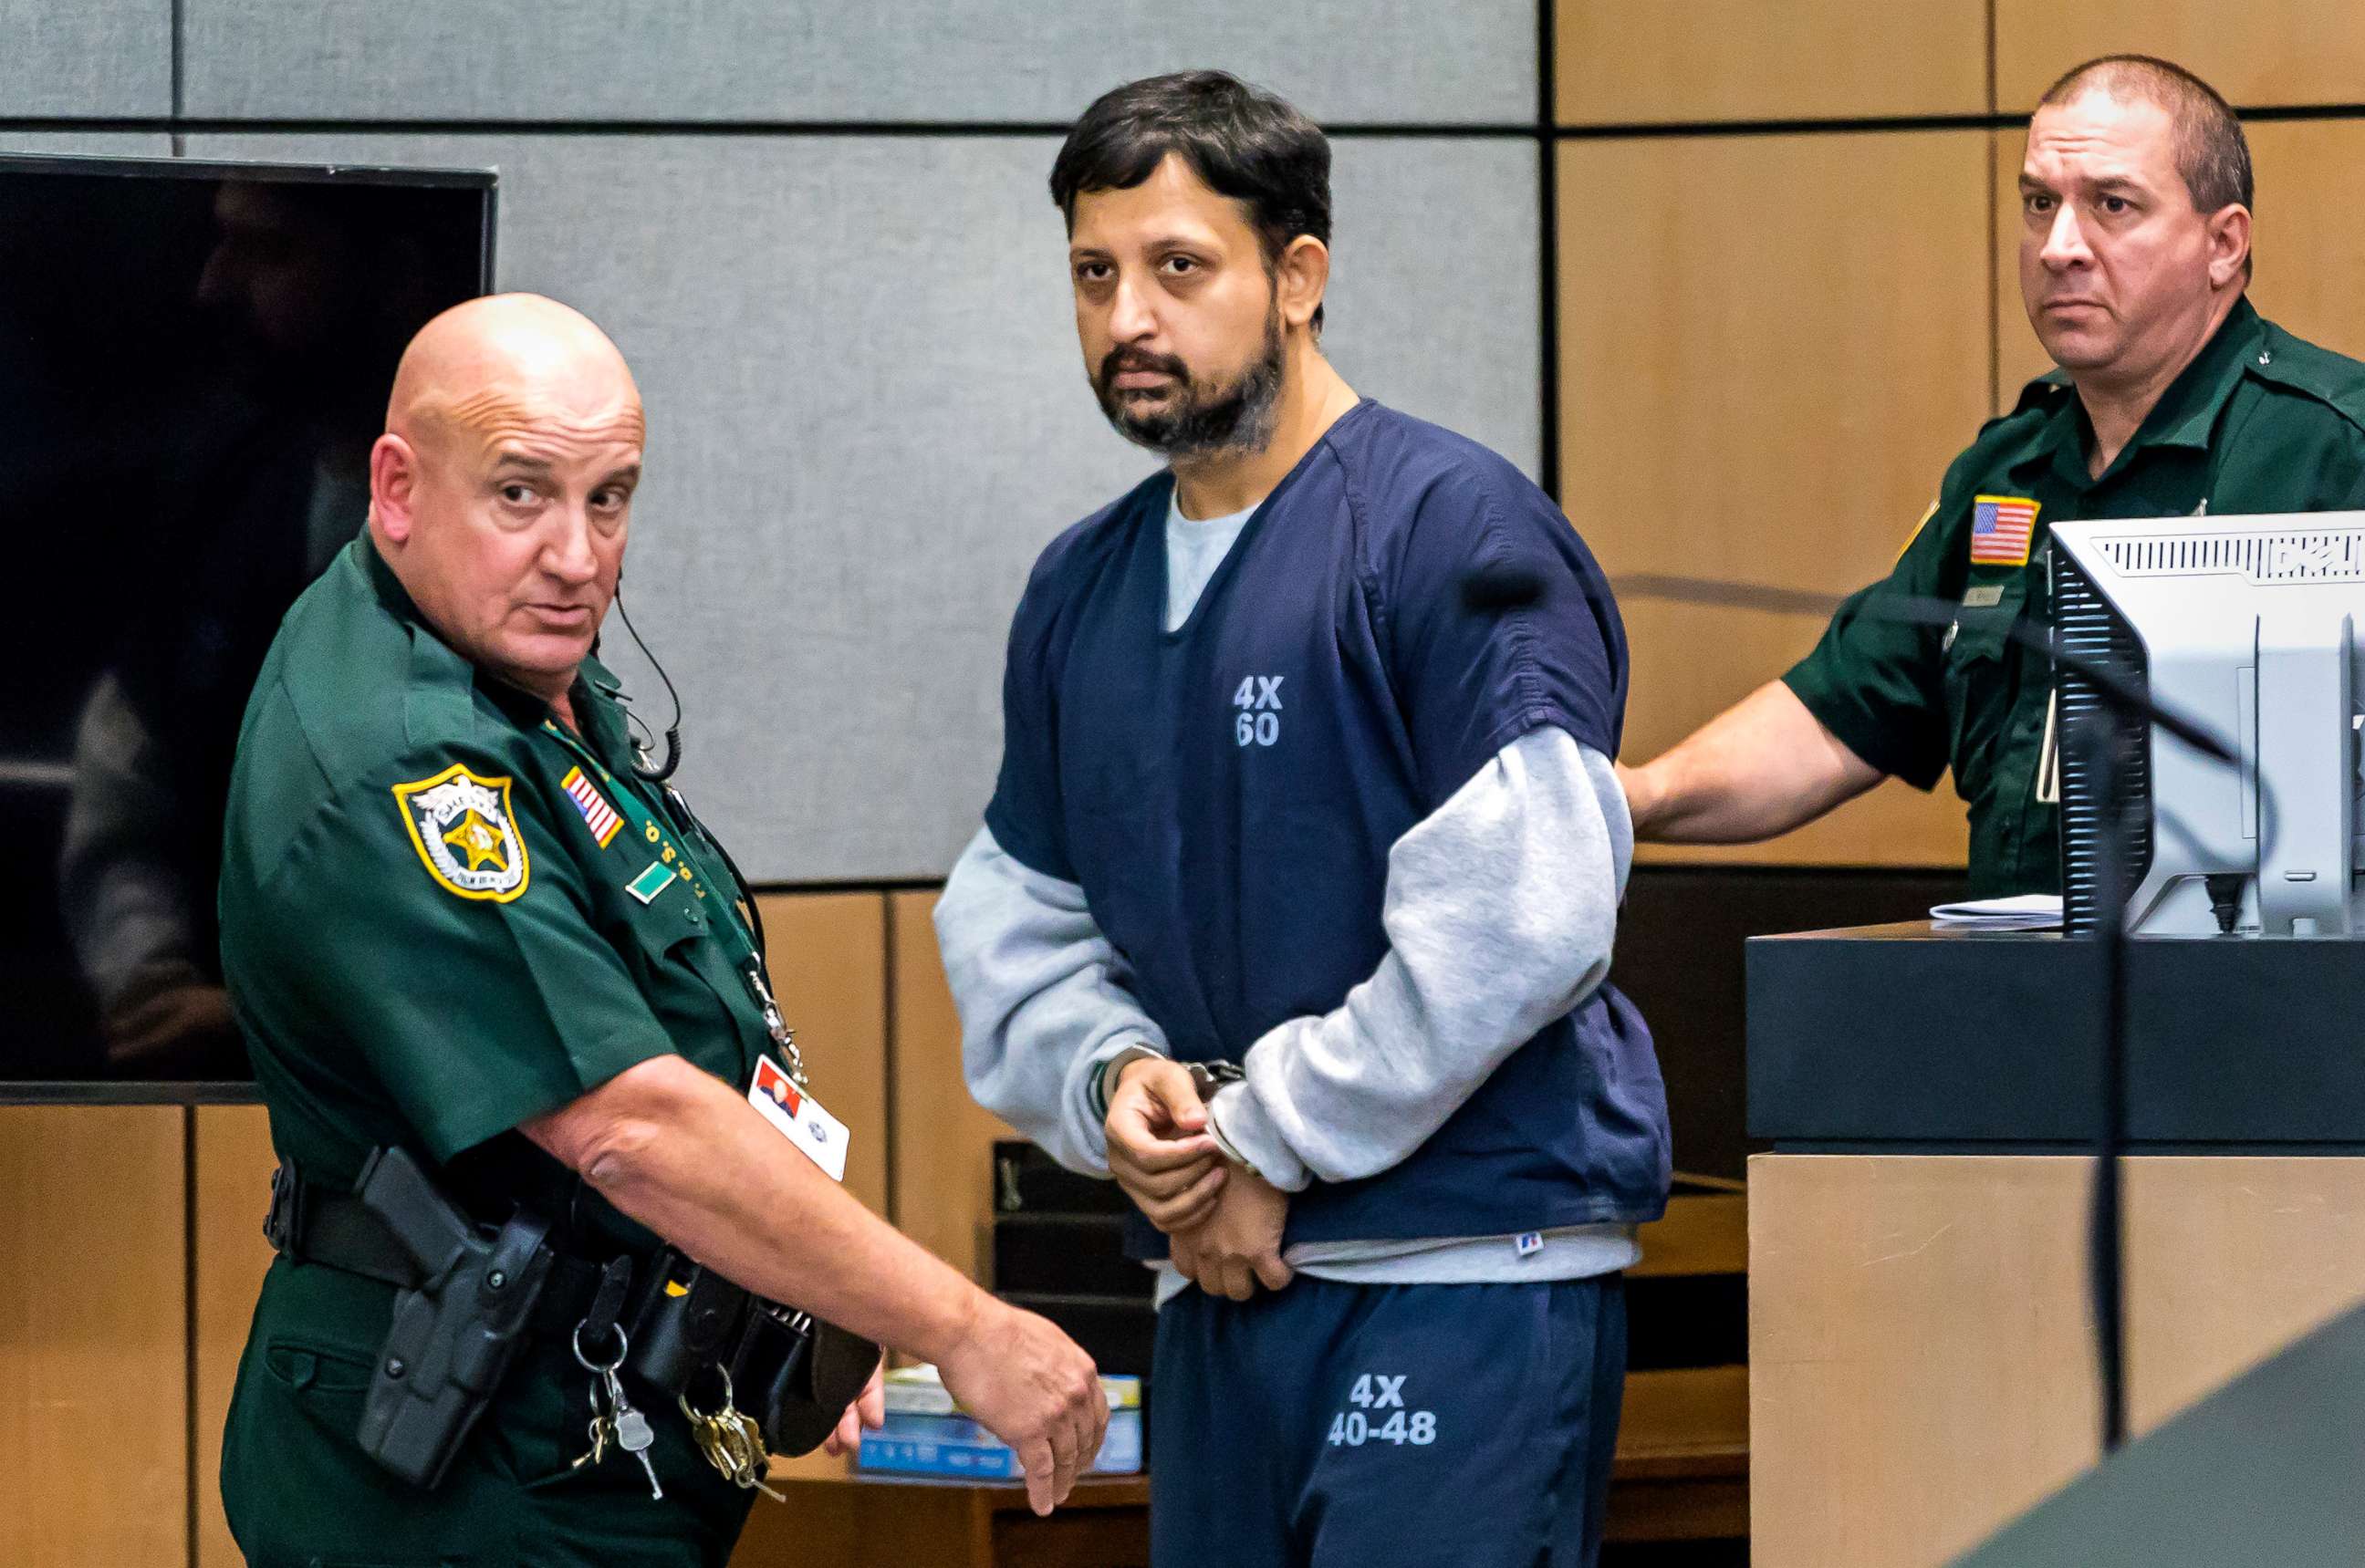 PHOTO: Nouman Raja is brought into the courtroom for sentencing for the shooting death of Corey Jones, April 25, 2019, in West Palm Beach, Fla.